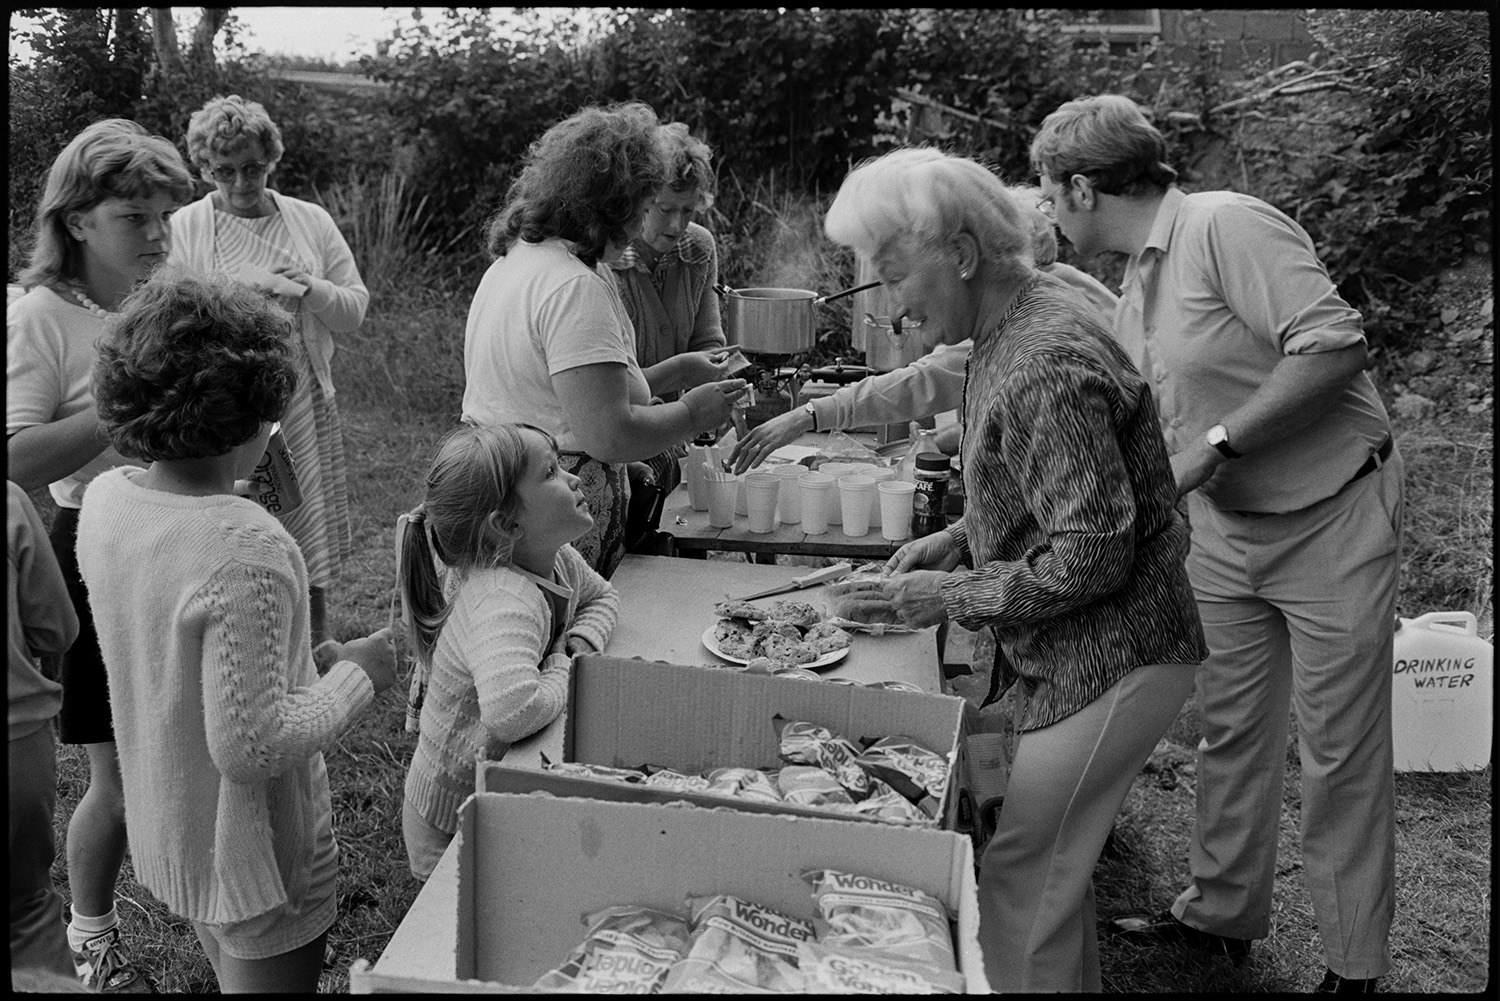 Flower show exhibits, jams, cups, sports, hot dog stall, bicycles, Clay Pigeon Shoot.
[Women and a man serving refreshments, including hot drinks and cakes, to women and children at the refreshment table at Dolton Flower Show.]